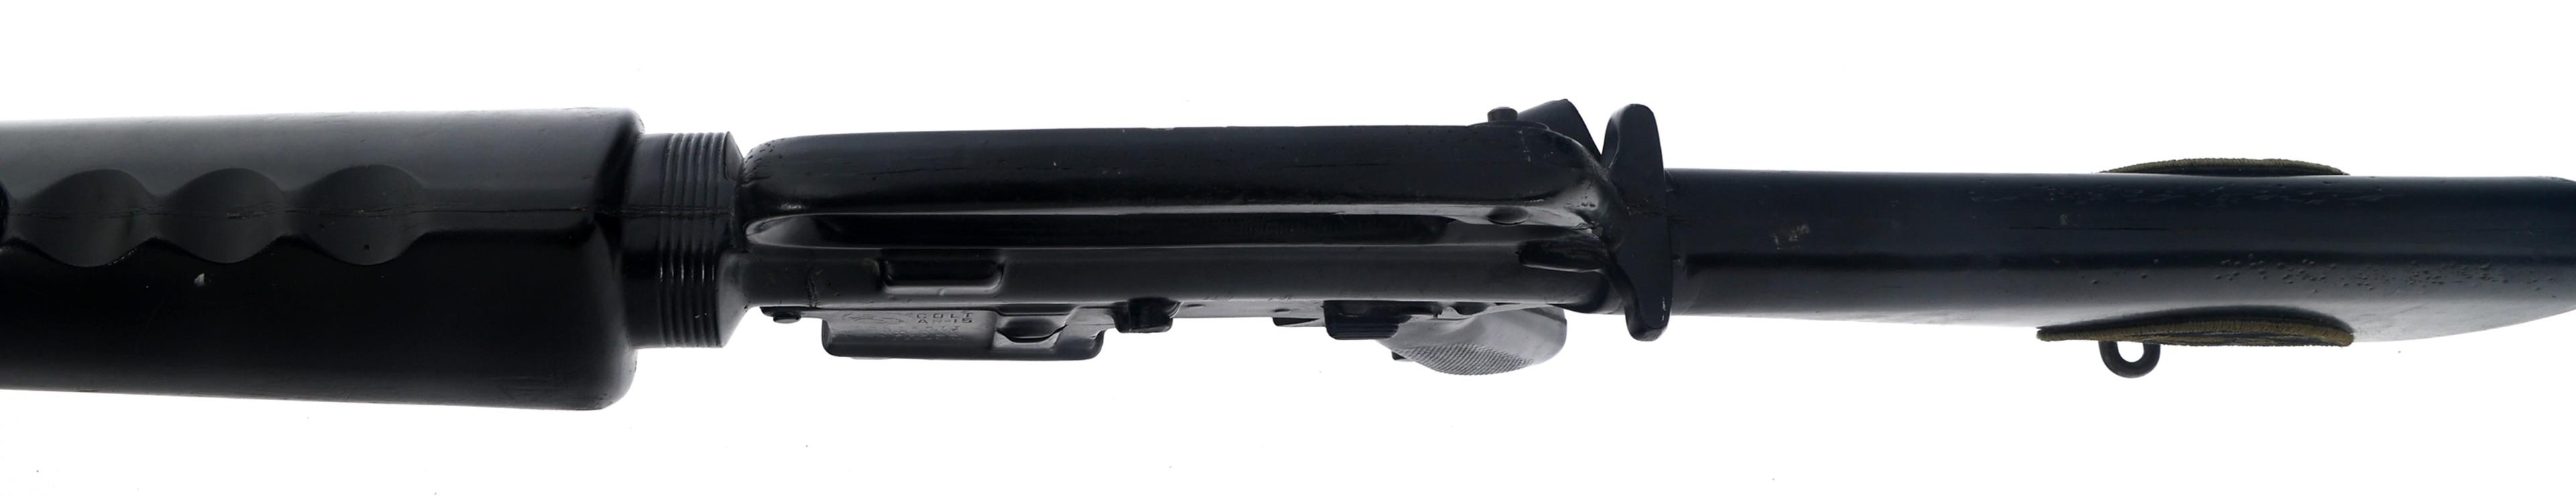 US M-16 RUBBER DUCK TRAINING RIFLE